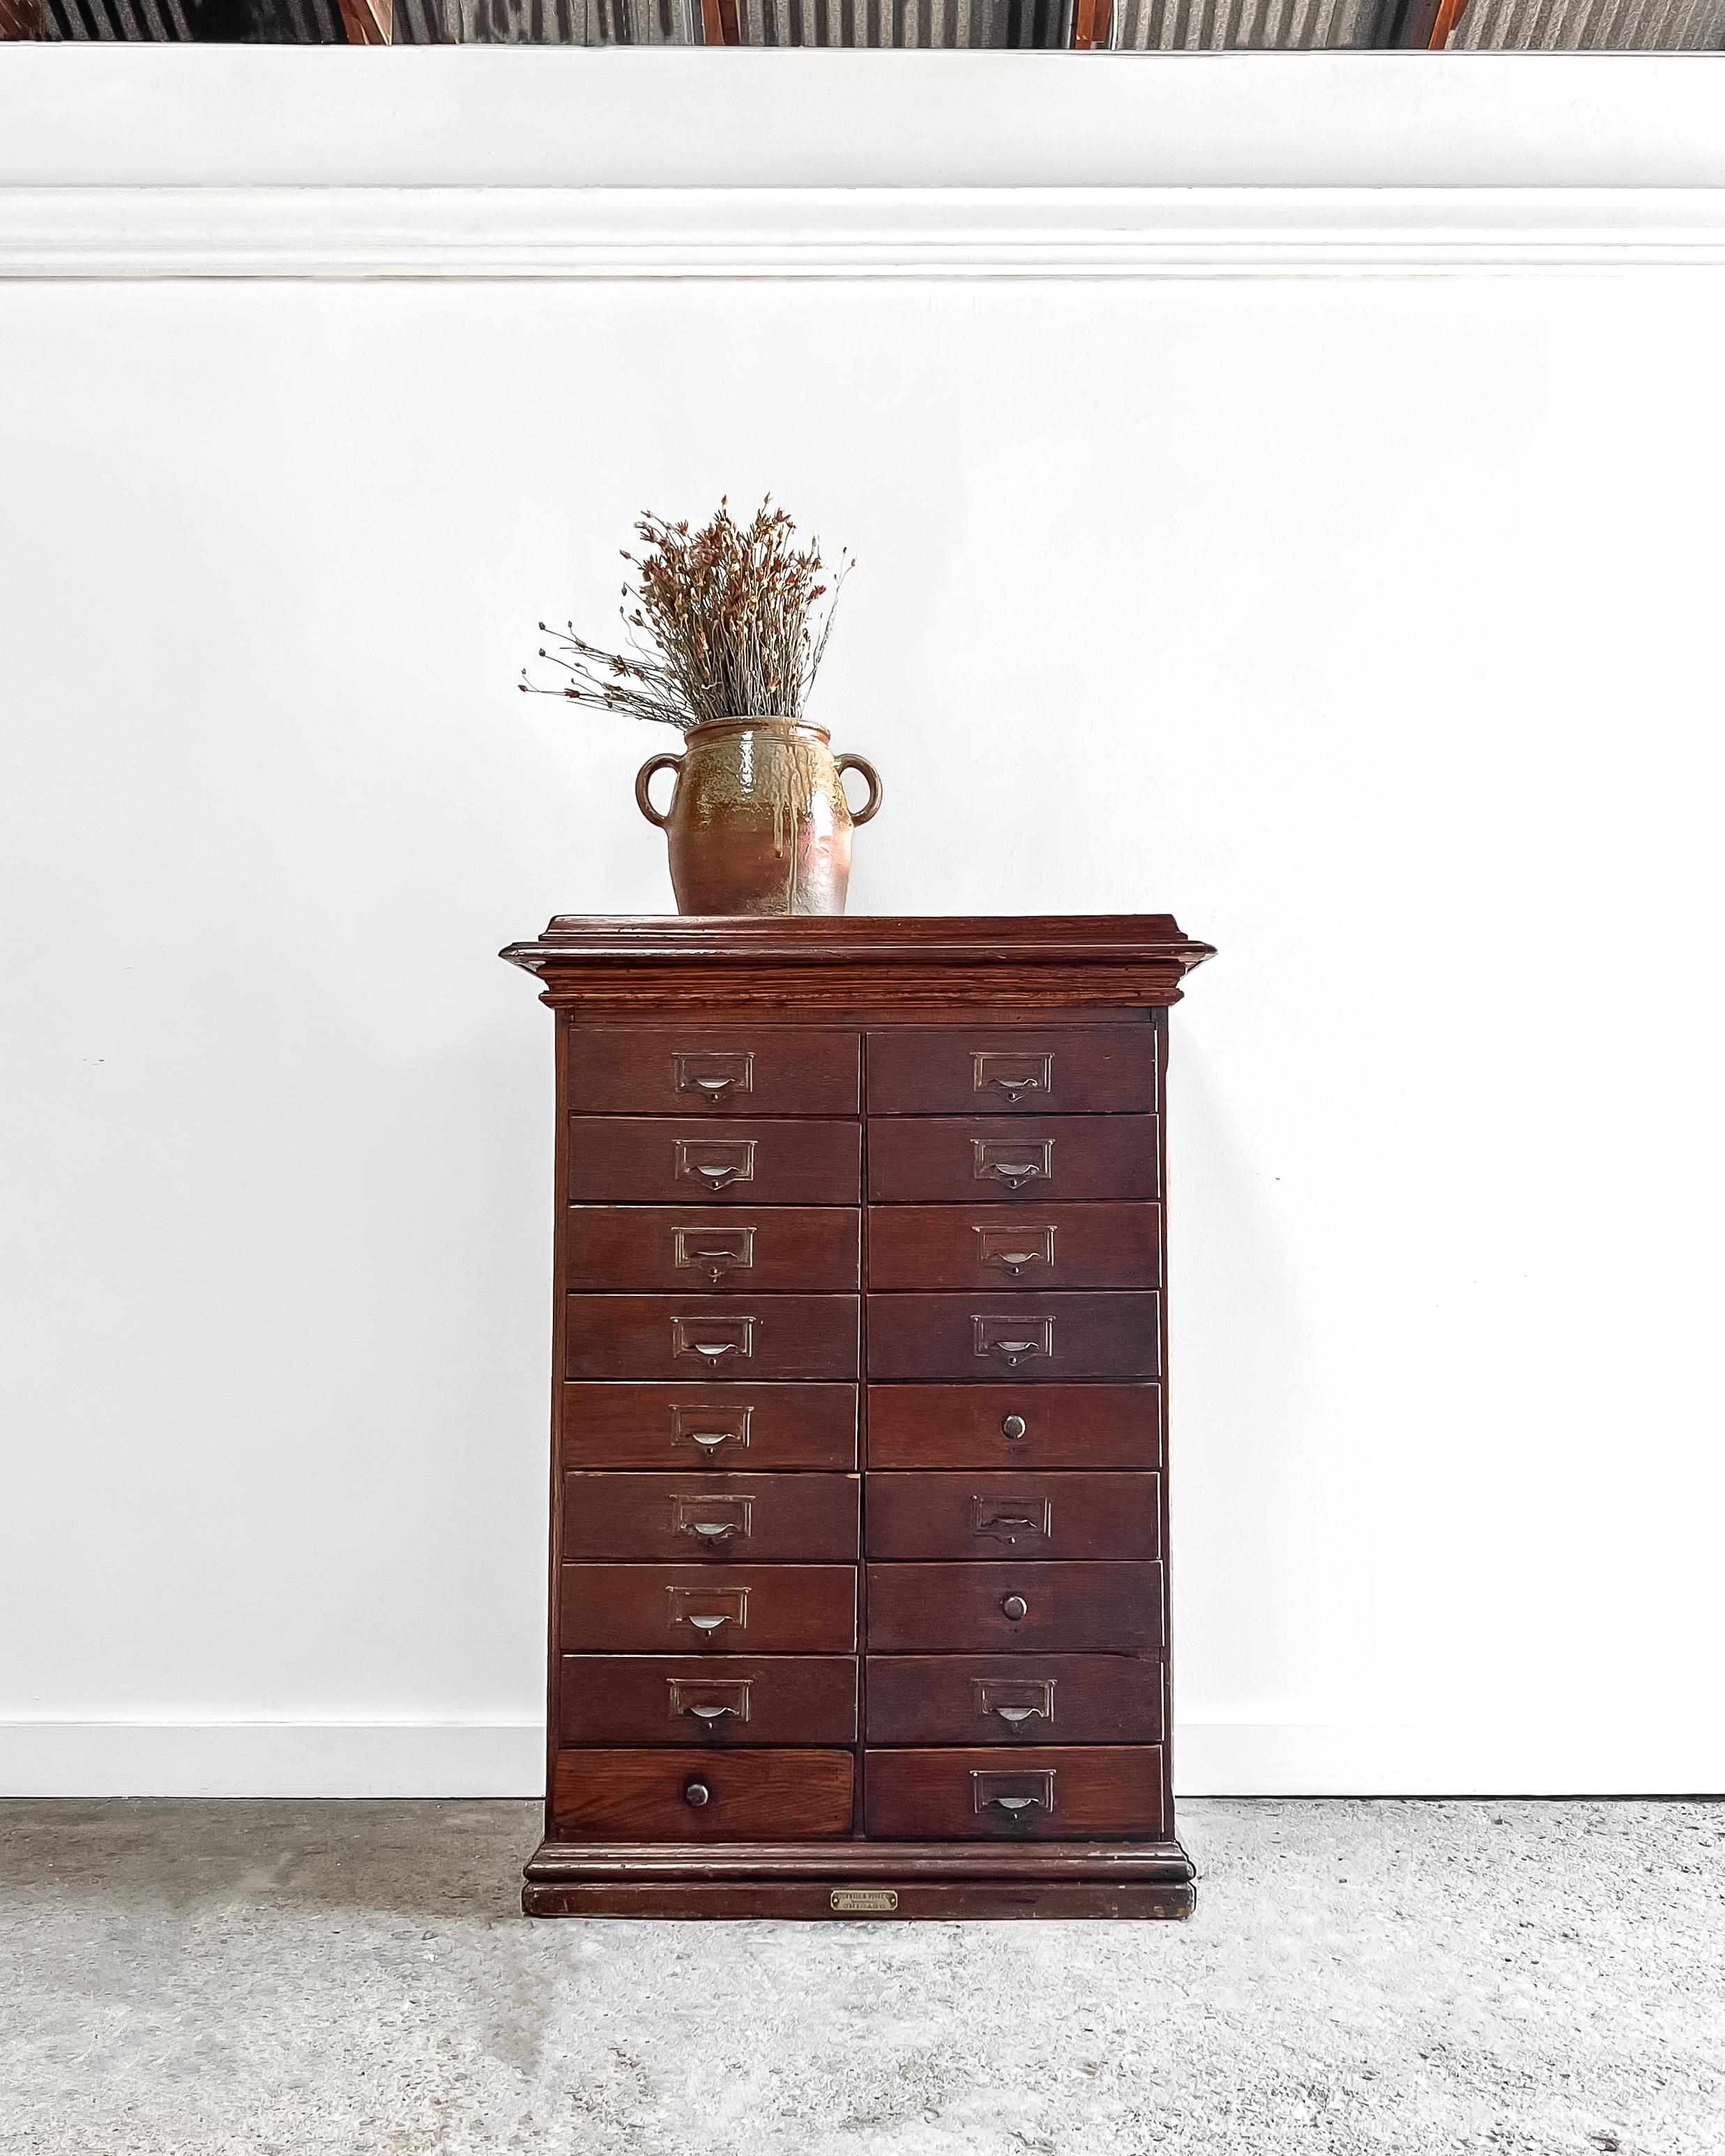 A solid wood antique Craftsman period “Wabash Rival Letter File” cabinet. Constructed by the Rockwell & Rupel Manufacturers, Chicago, IL, the cabinet boasts 18 narrow drawers featuring brass label pull handles.

Each of the 18 drawers pulls out